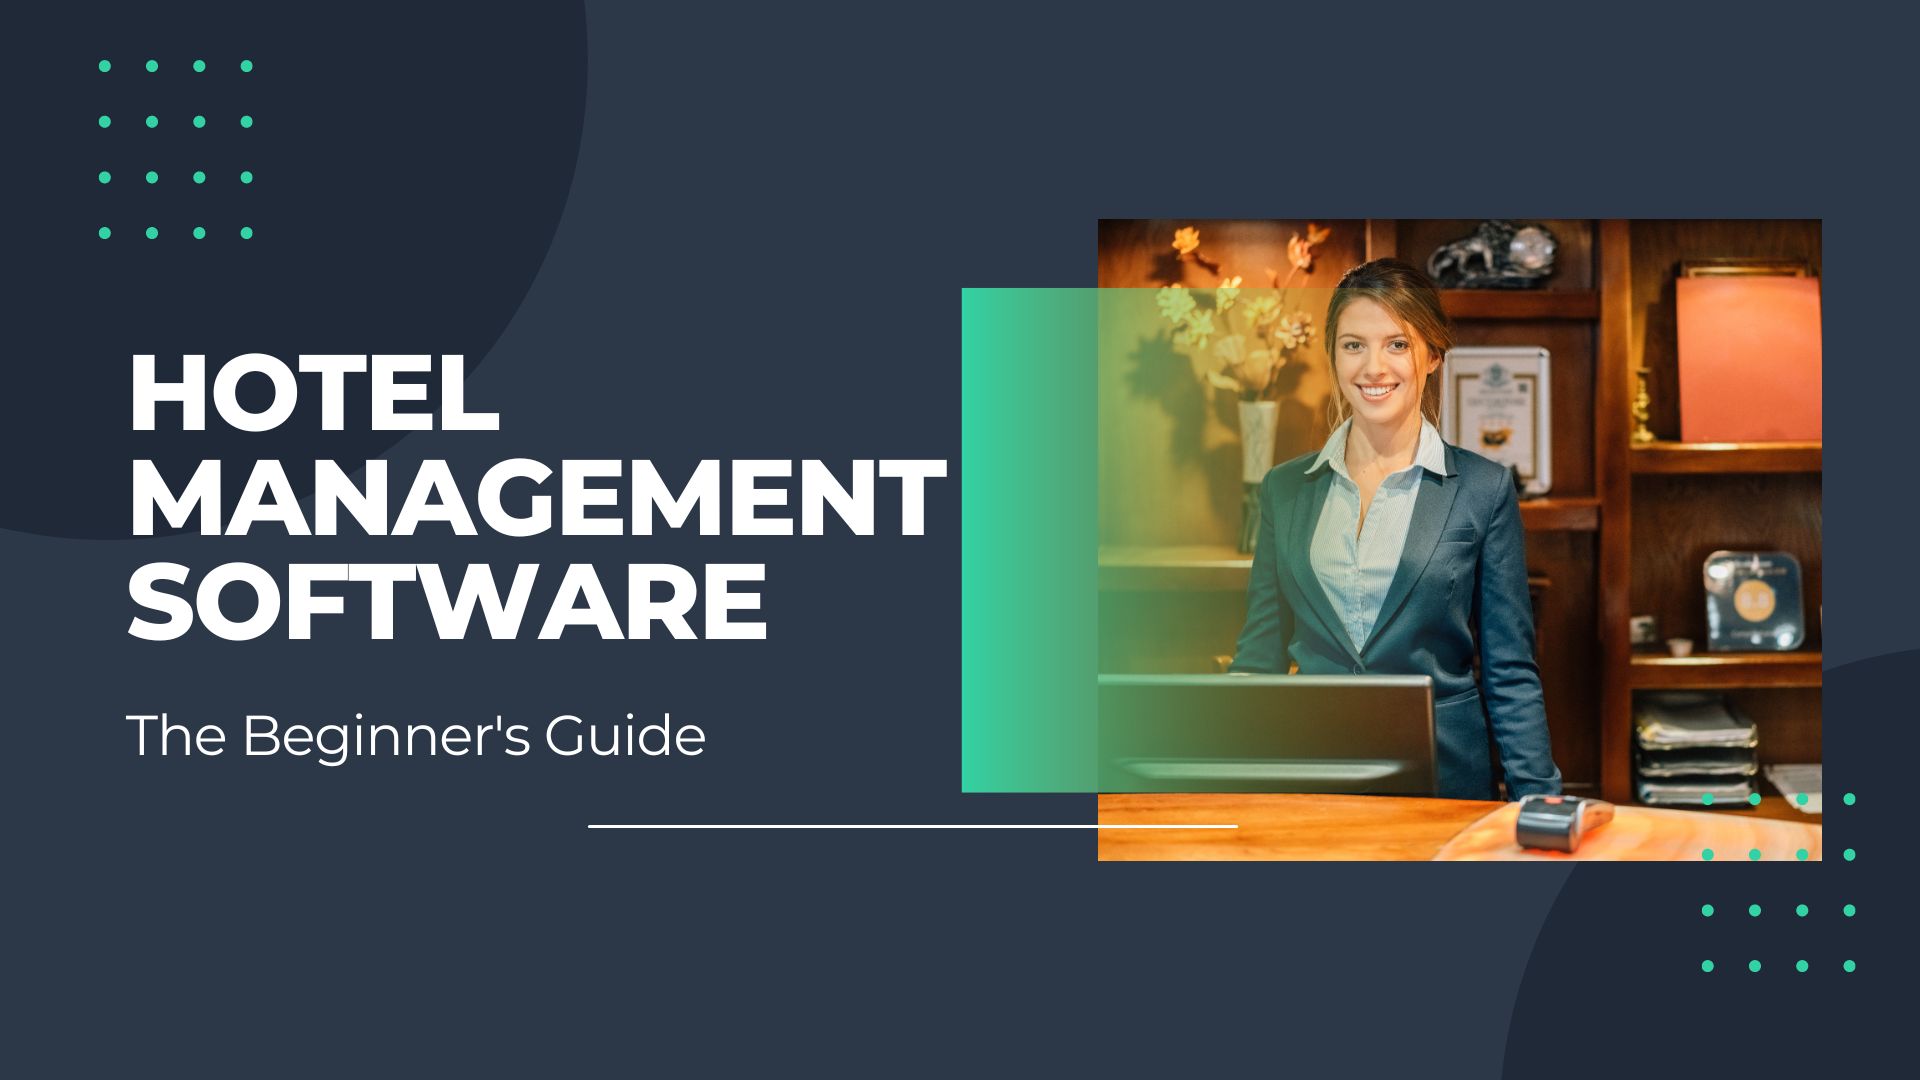 The Beginner’s Guide to Implementing Hotel Management Software